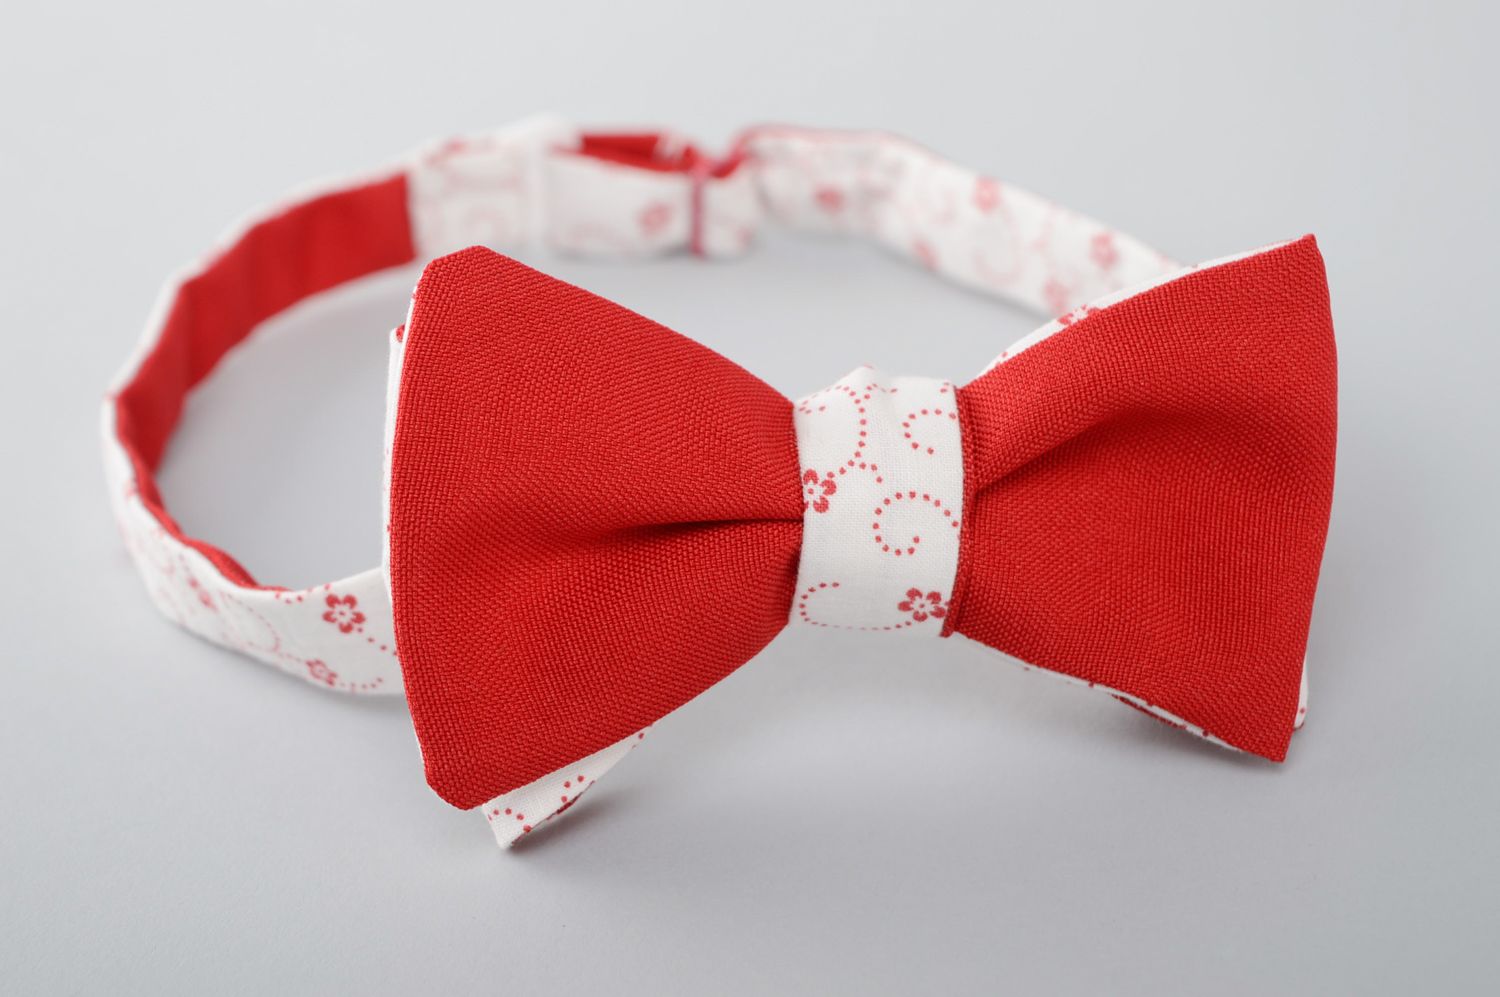 Two-sided fabric bow tie with red and white print photo 3